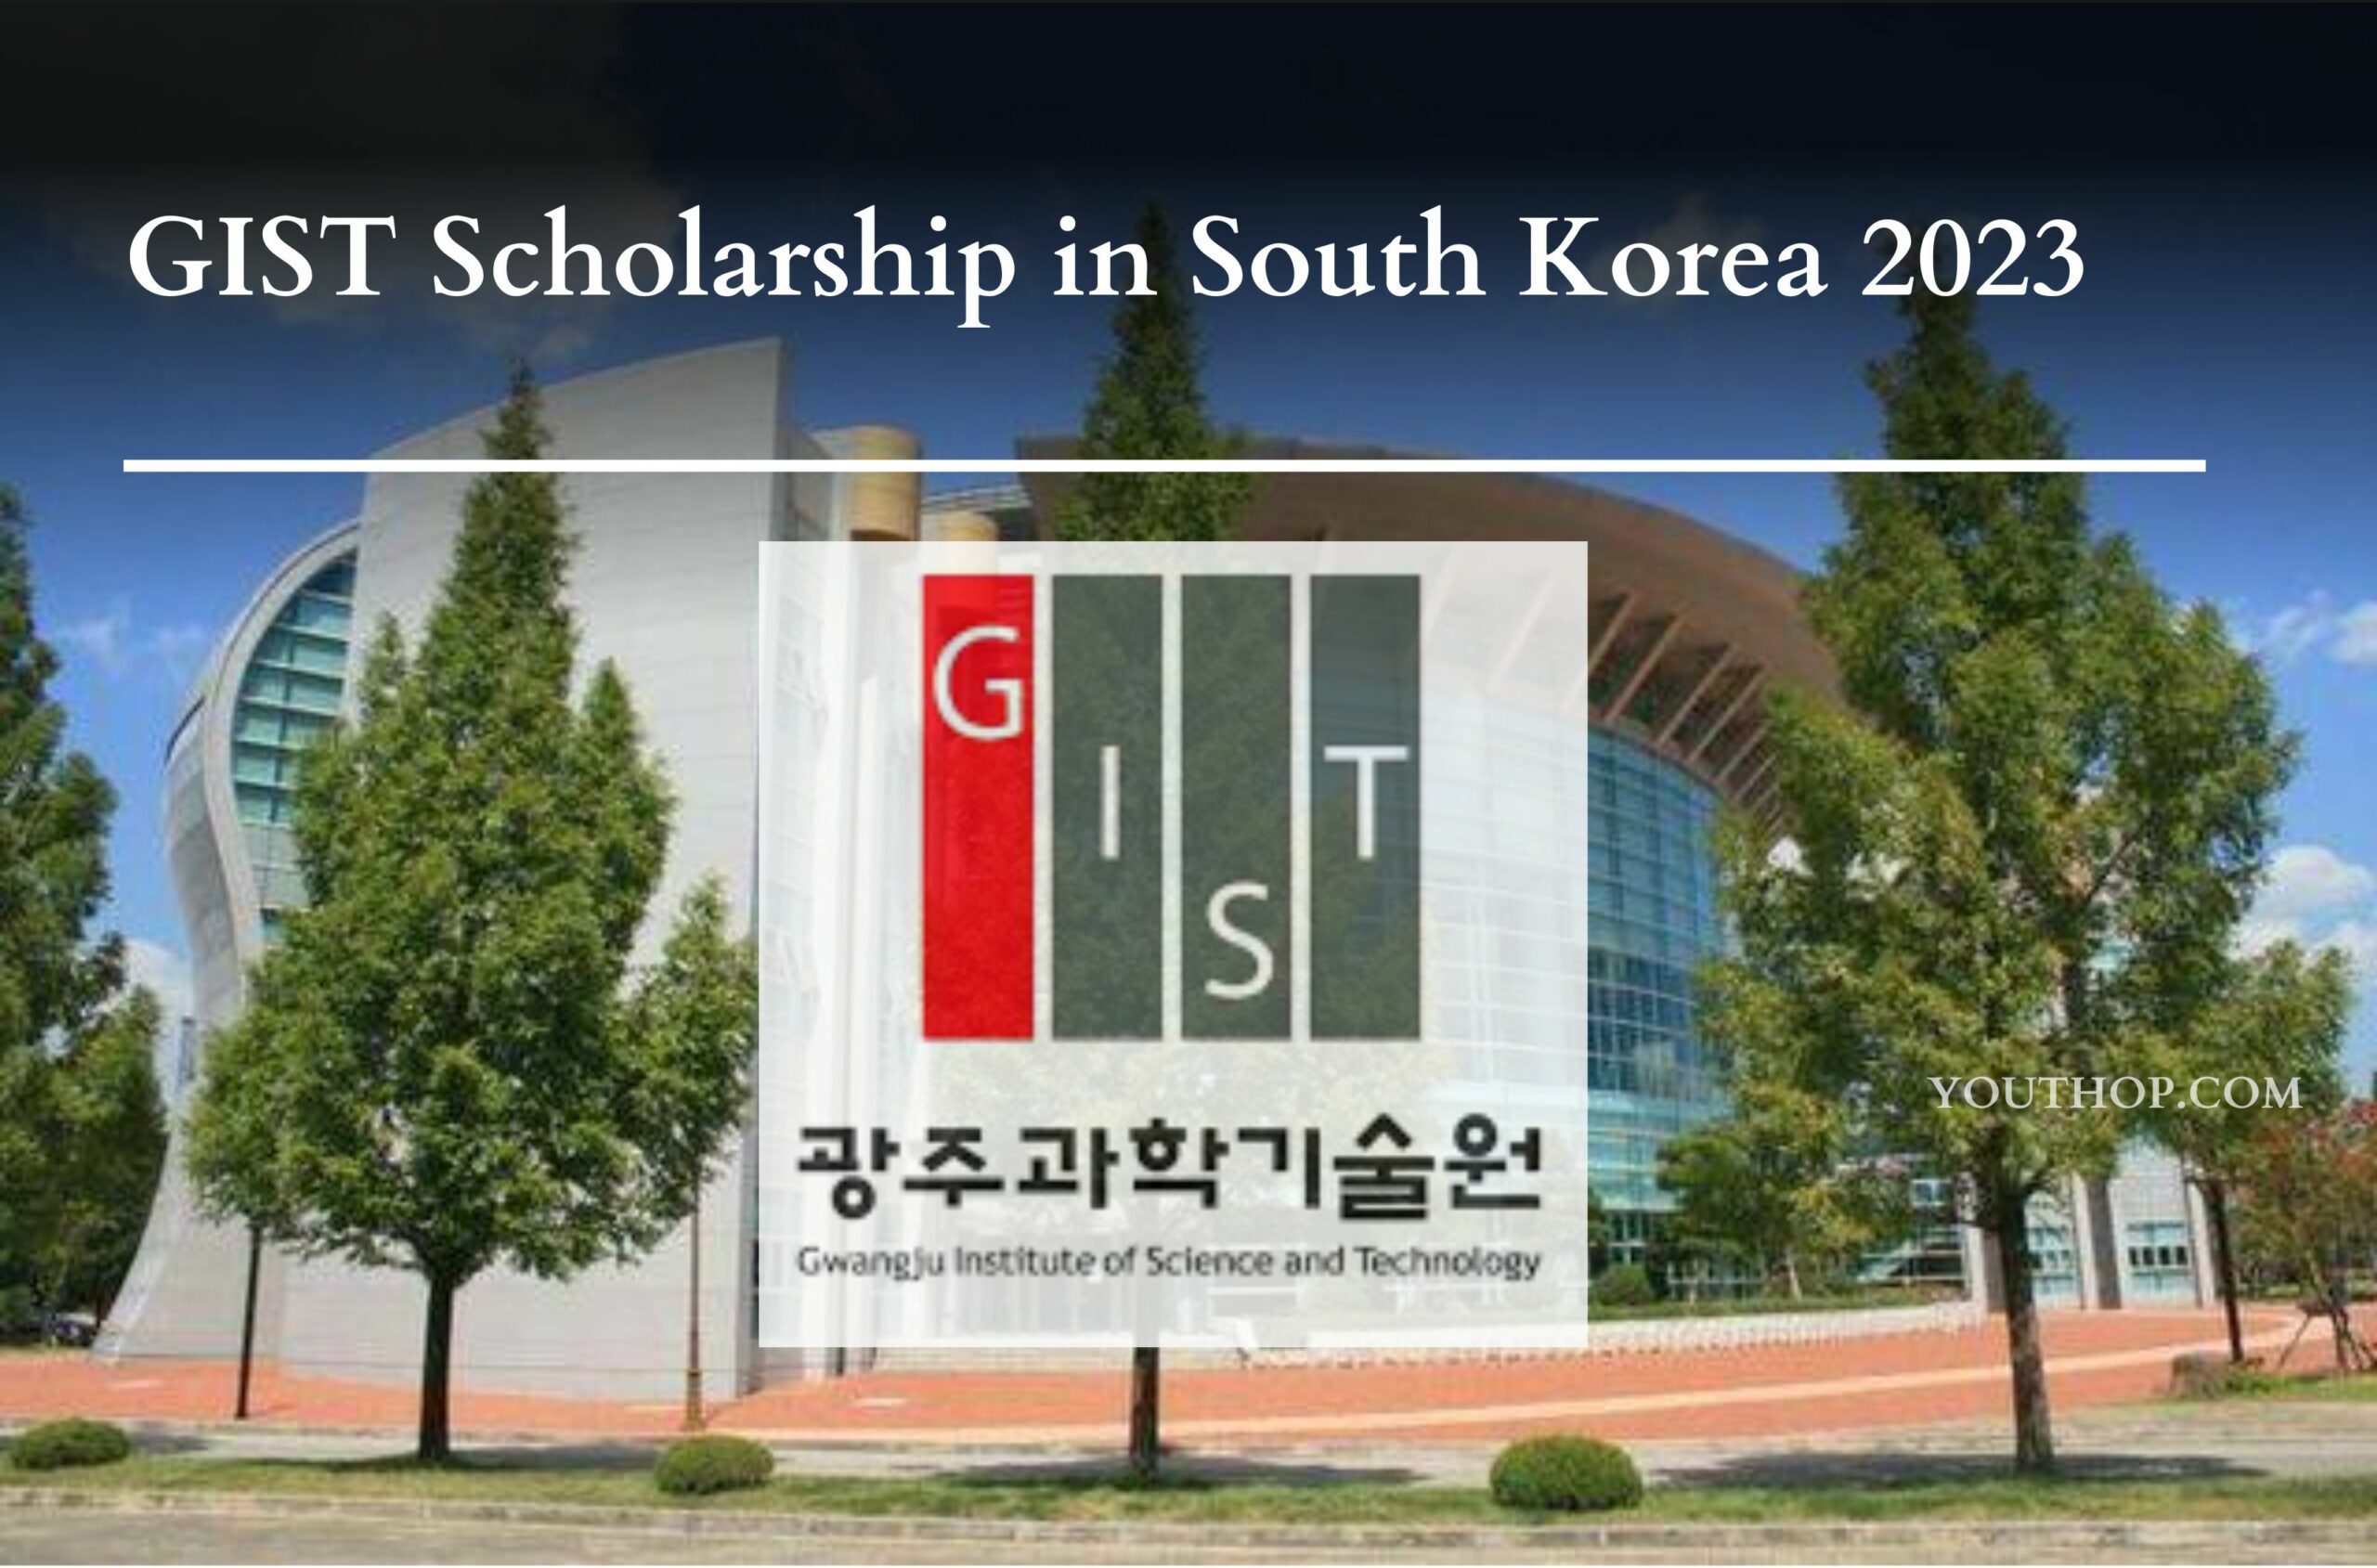 GIST Scholarship in South Korea 2023 Youth Opportunities